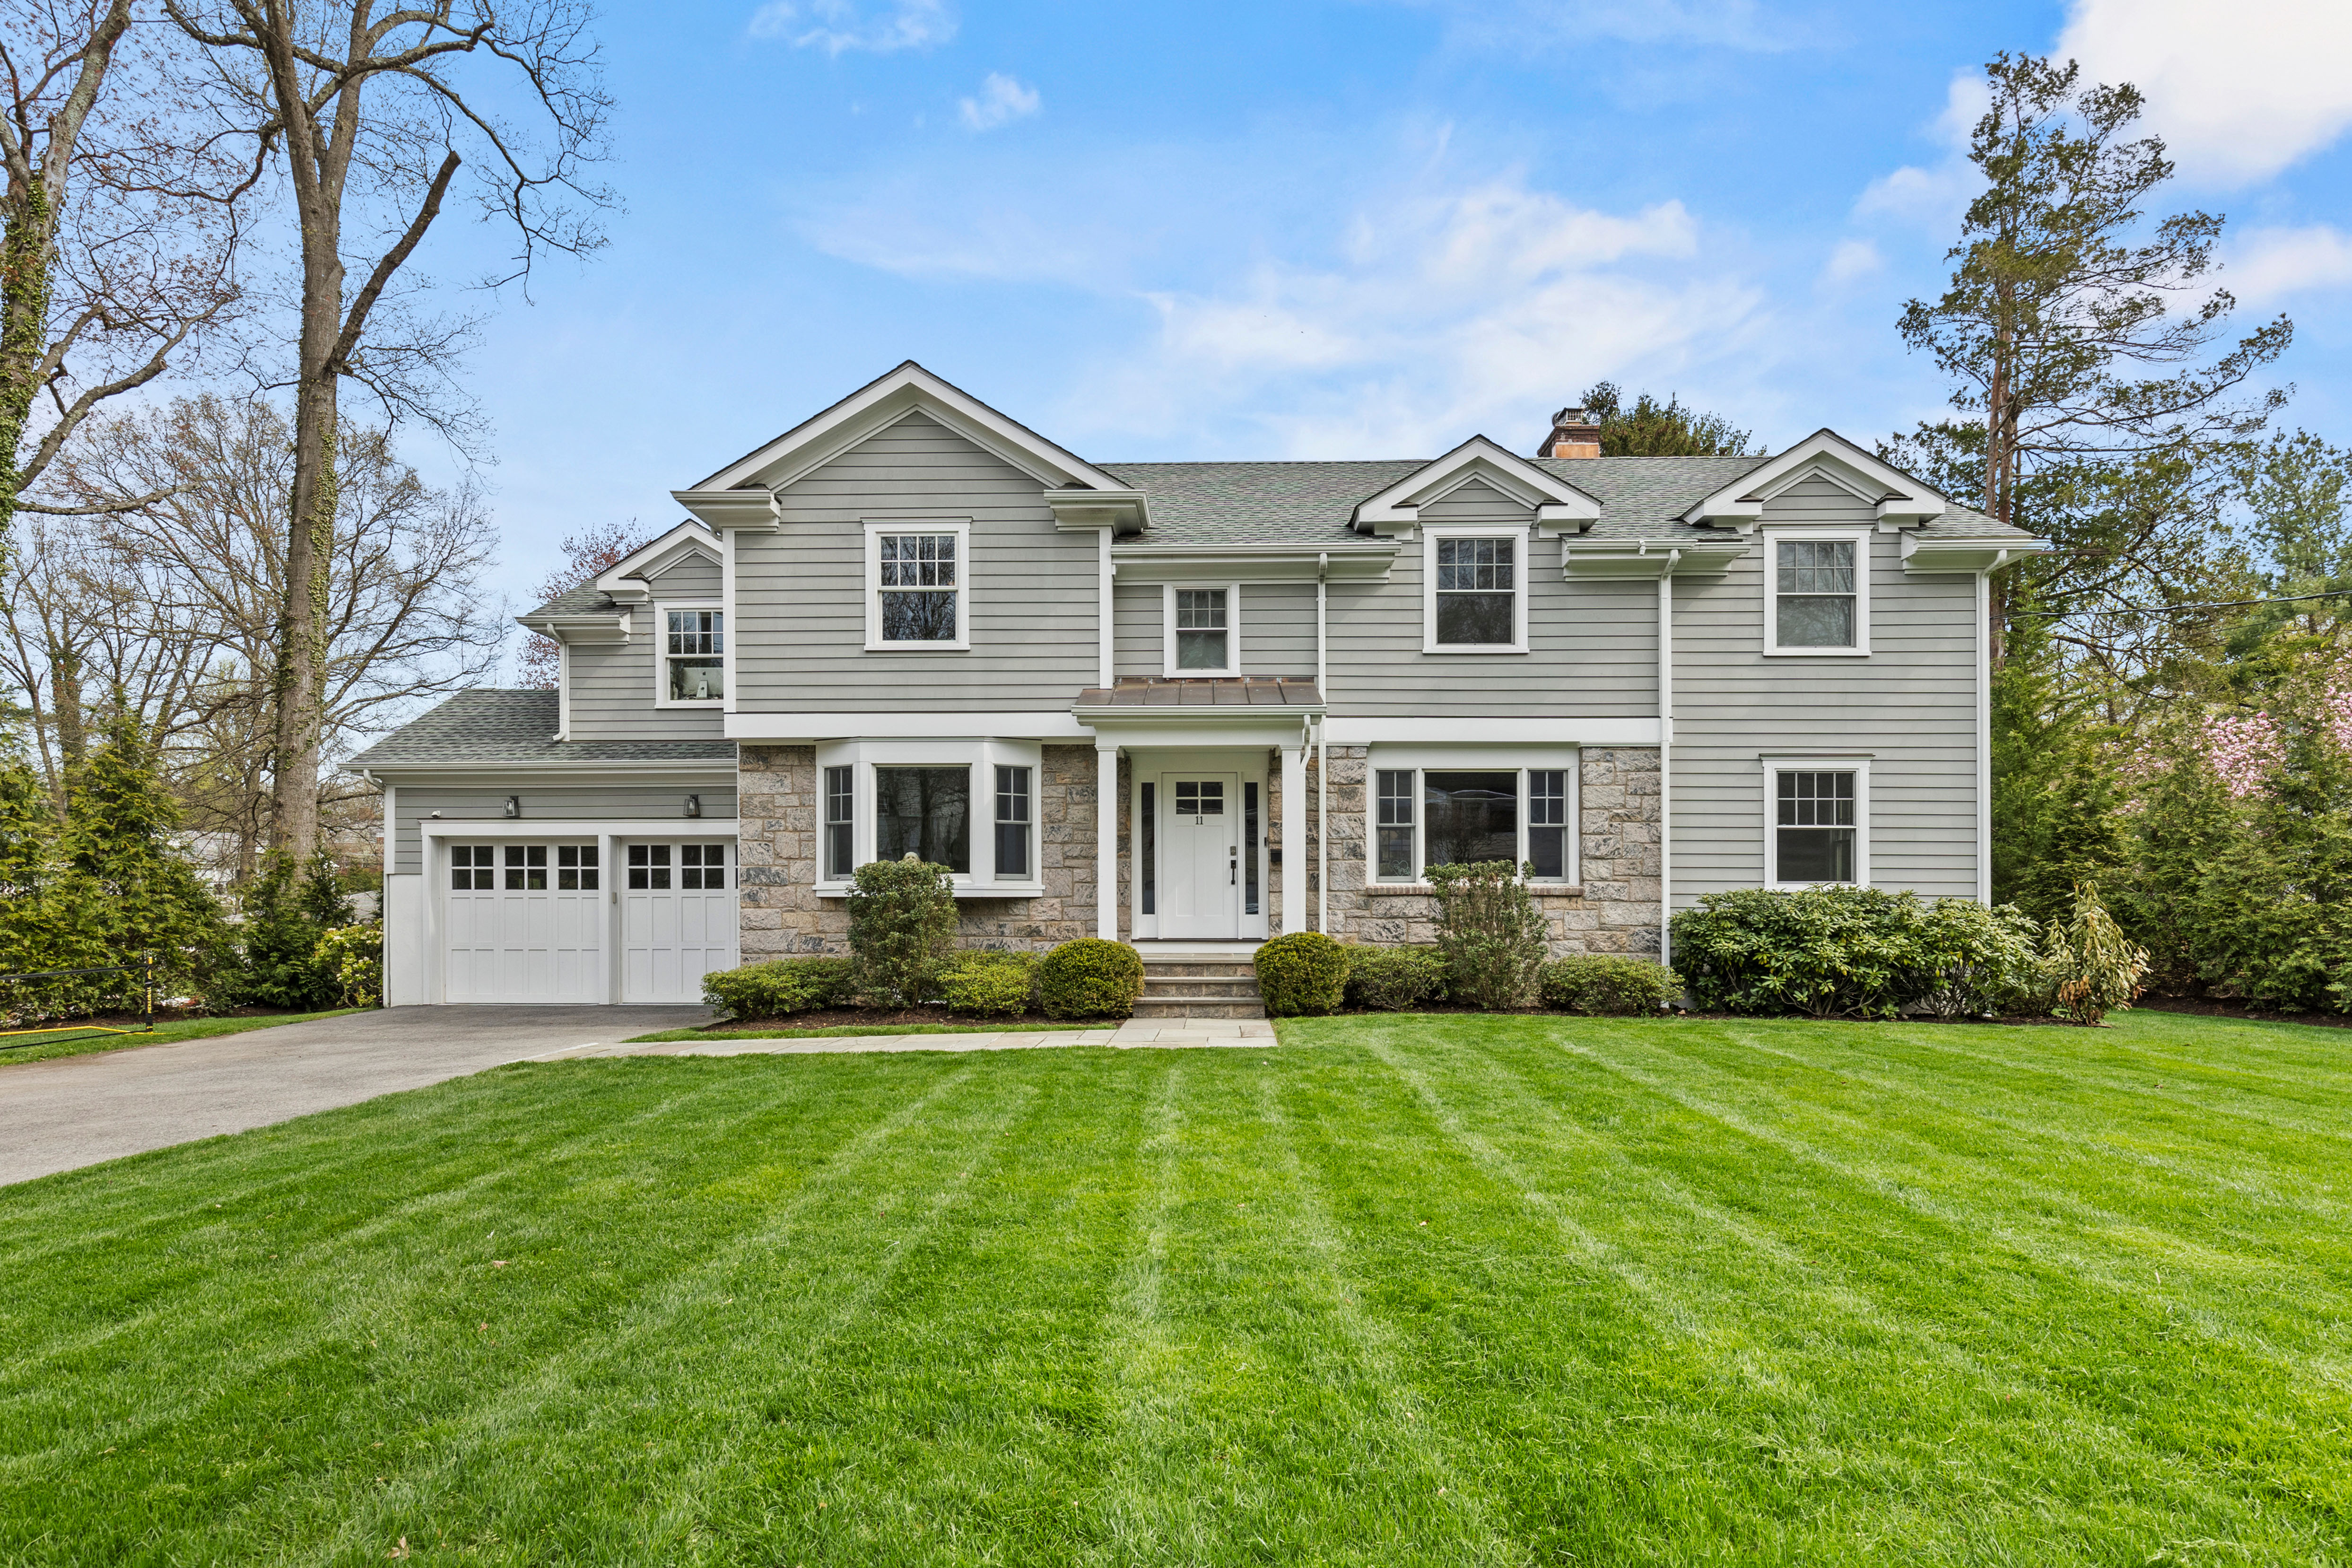 Modern And Beautiful Center Hall Colonial